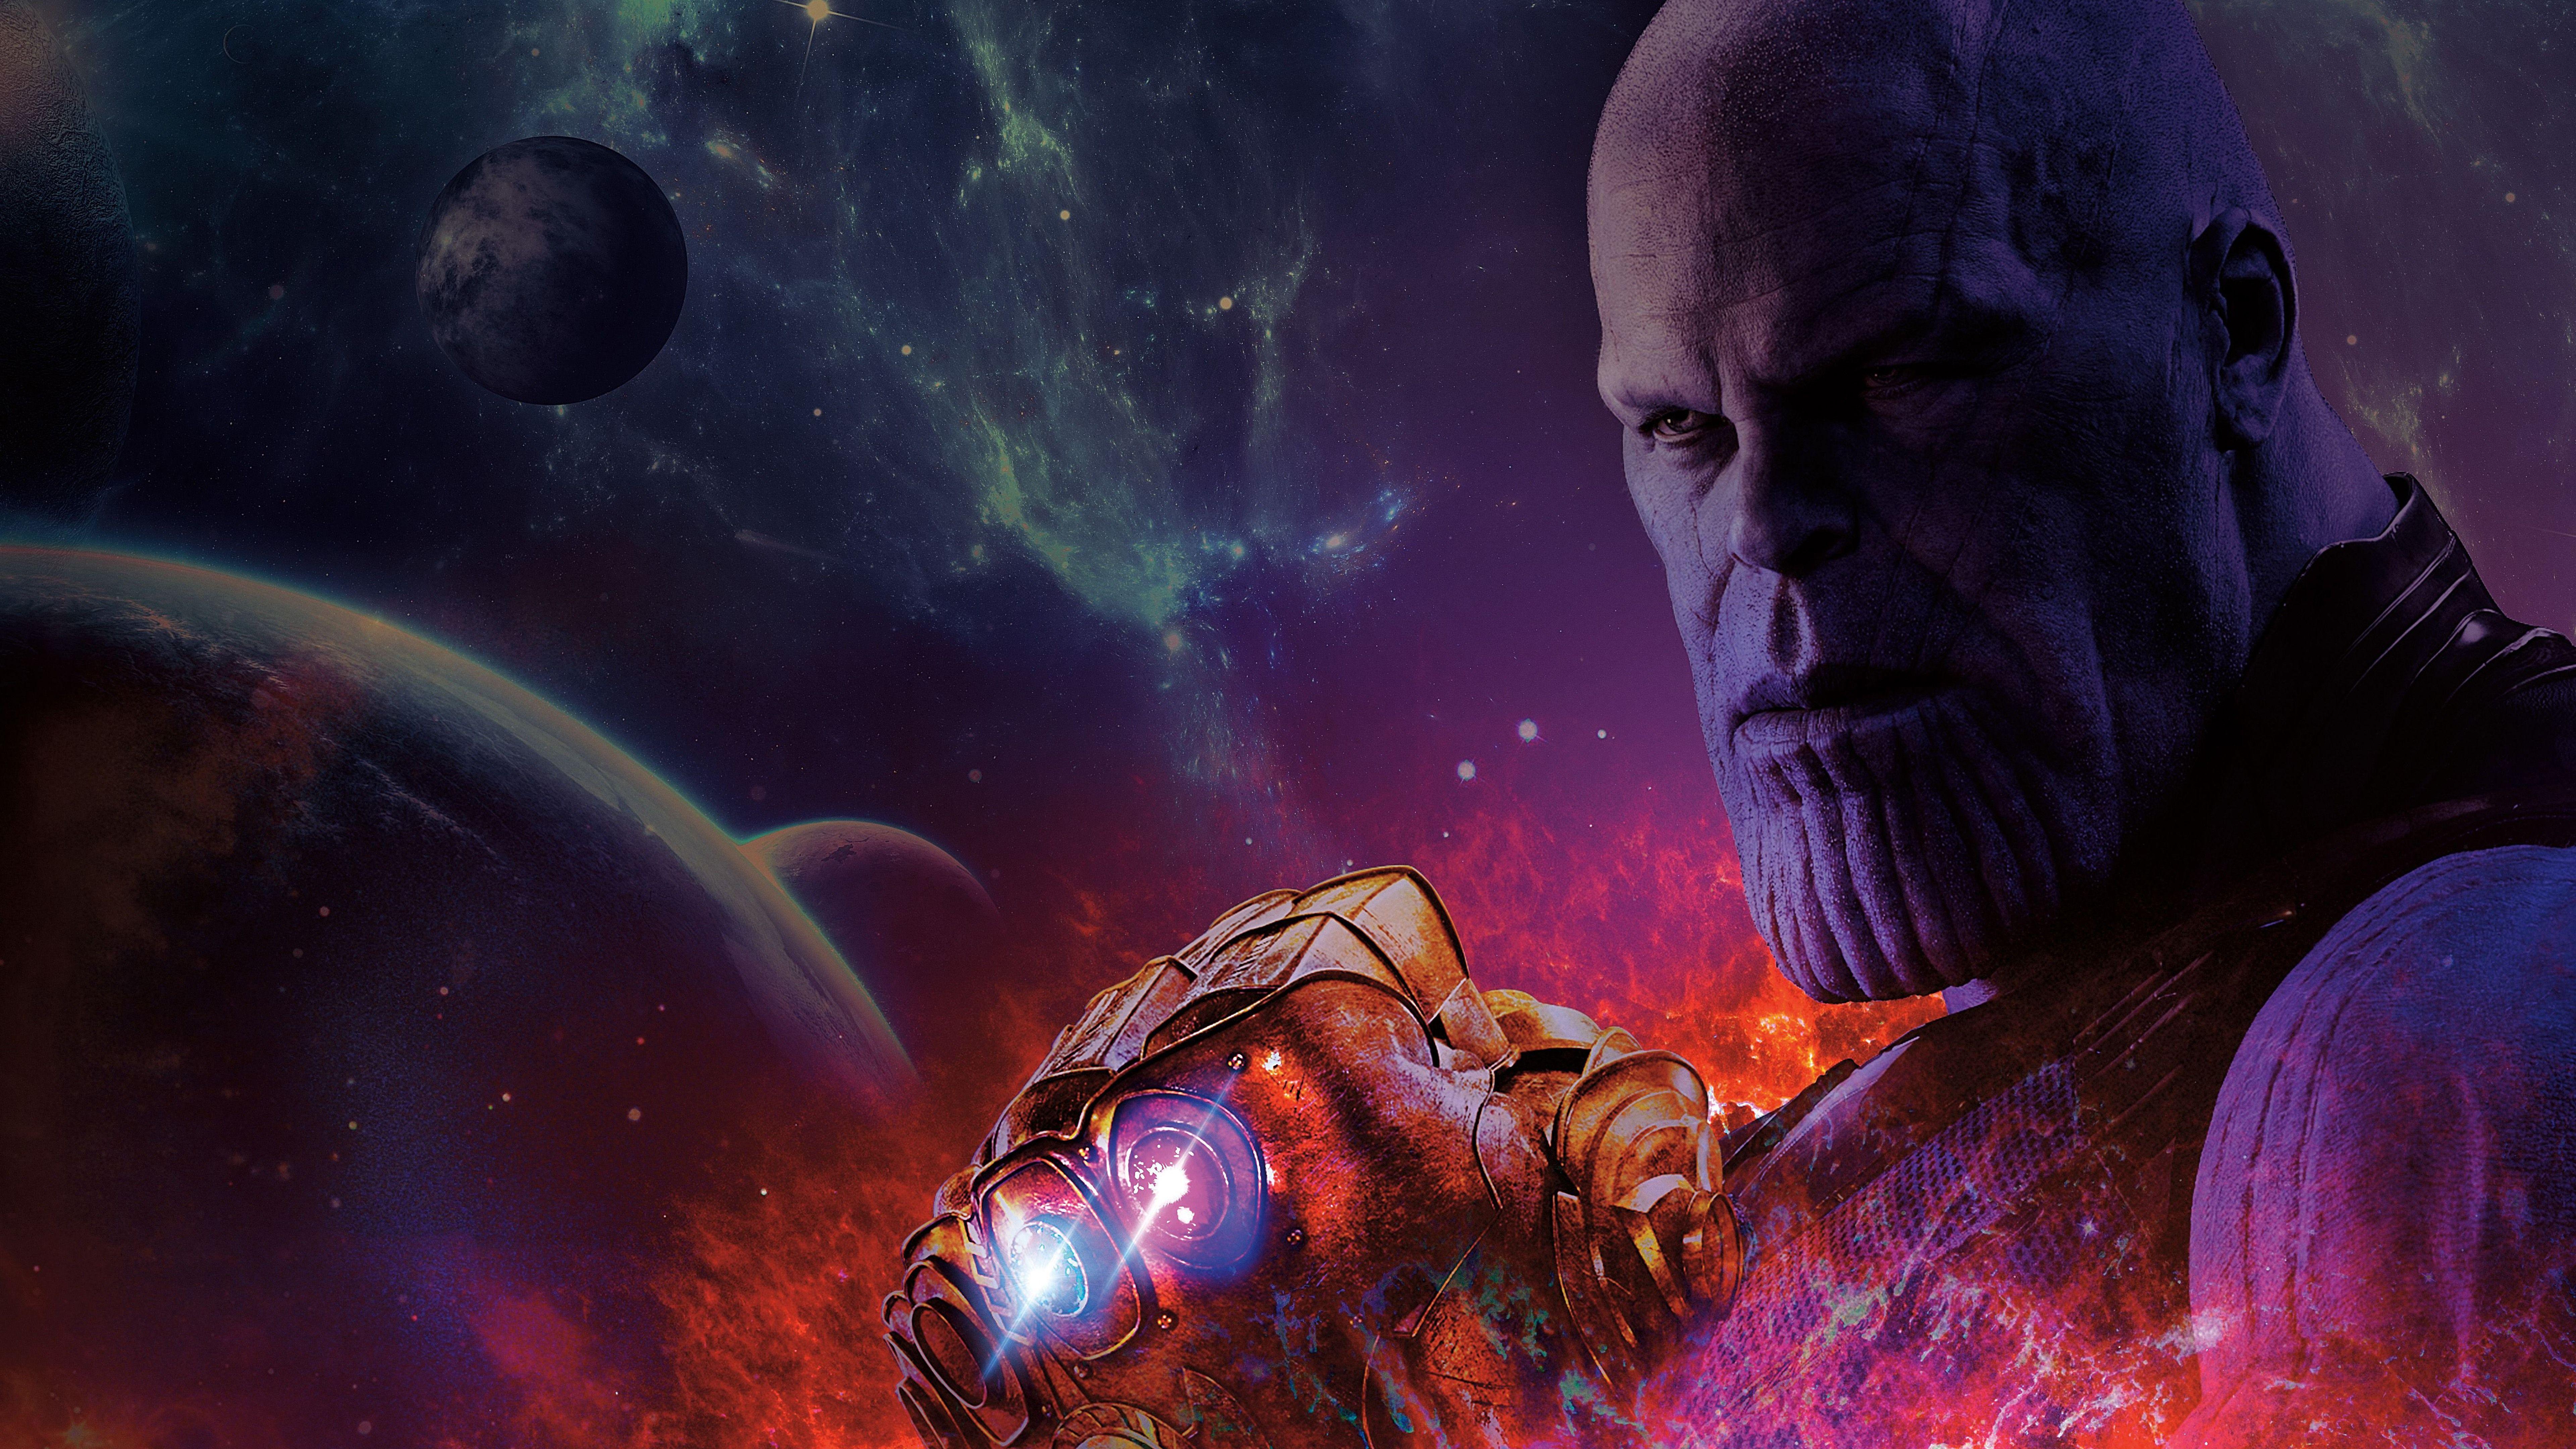 7680x4320 Avengers Infinity War Thanos With Gauntlet Infinity Stone, HD